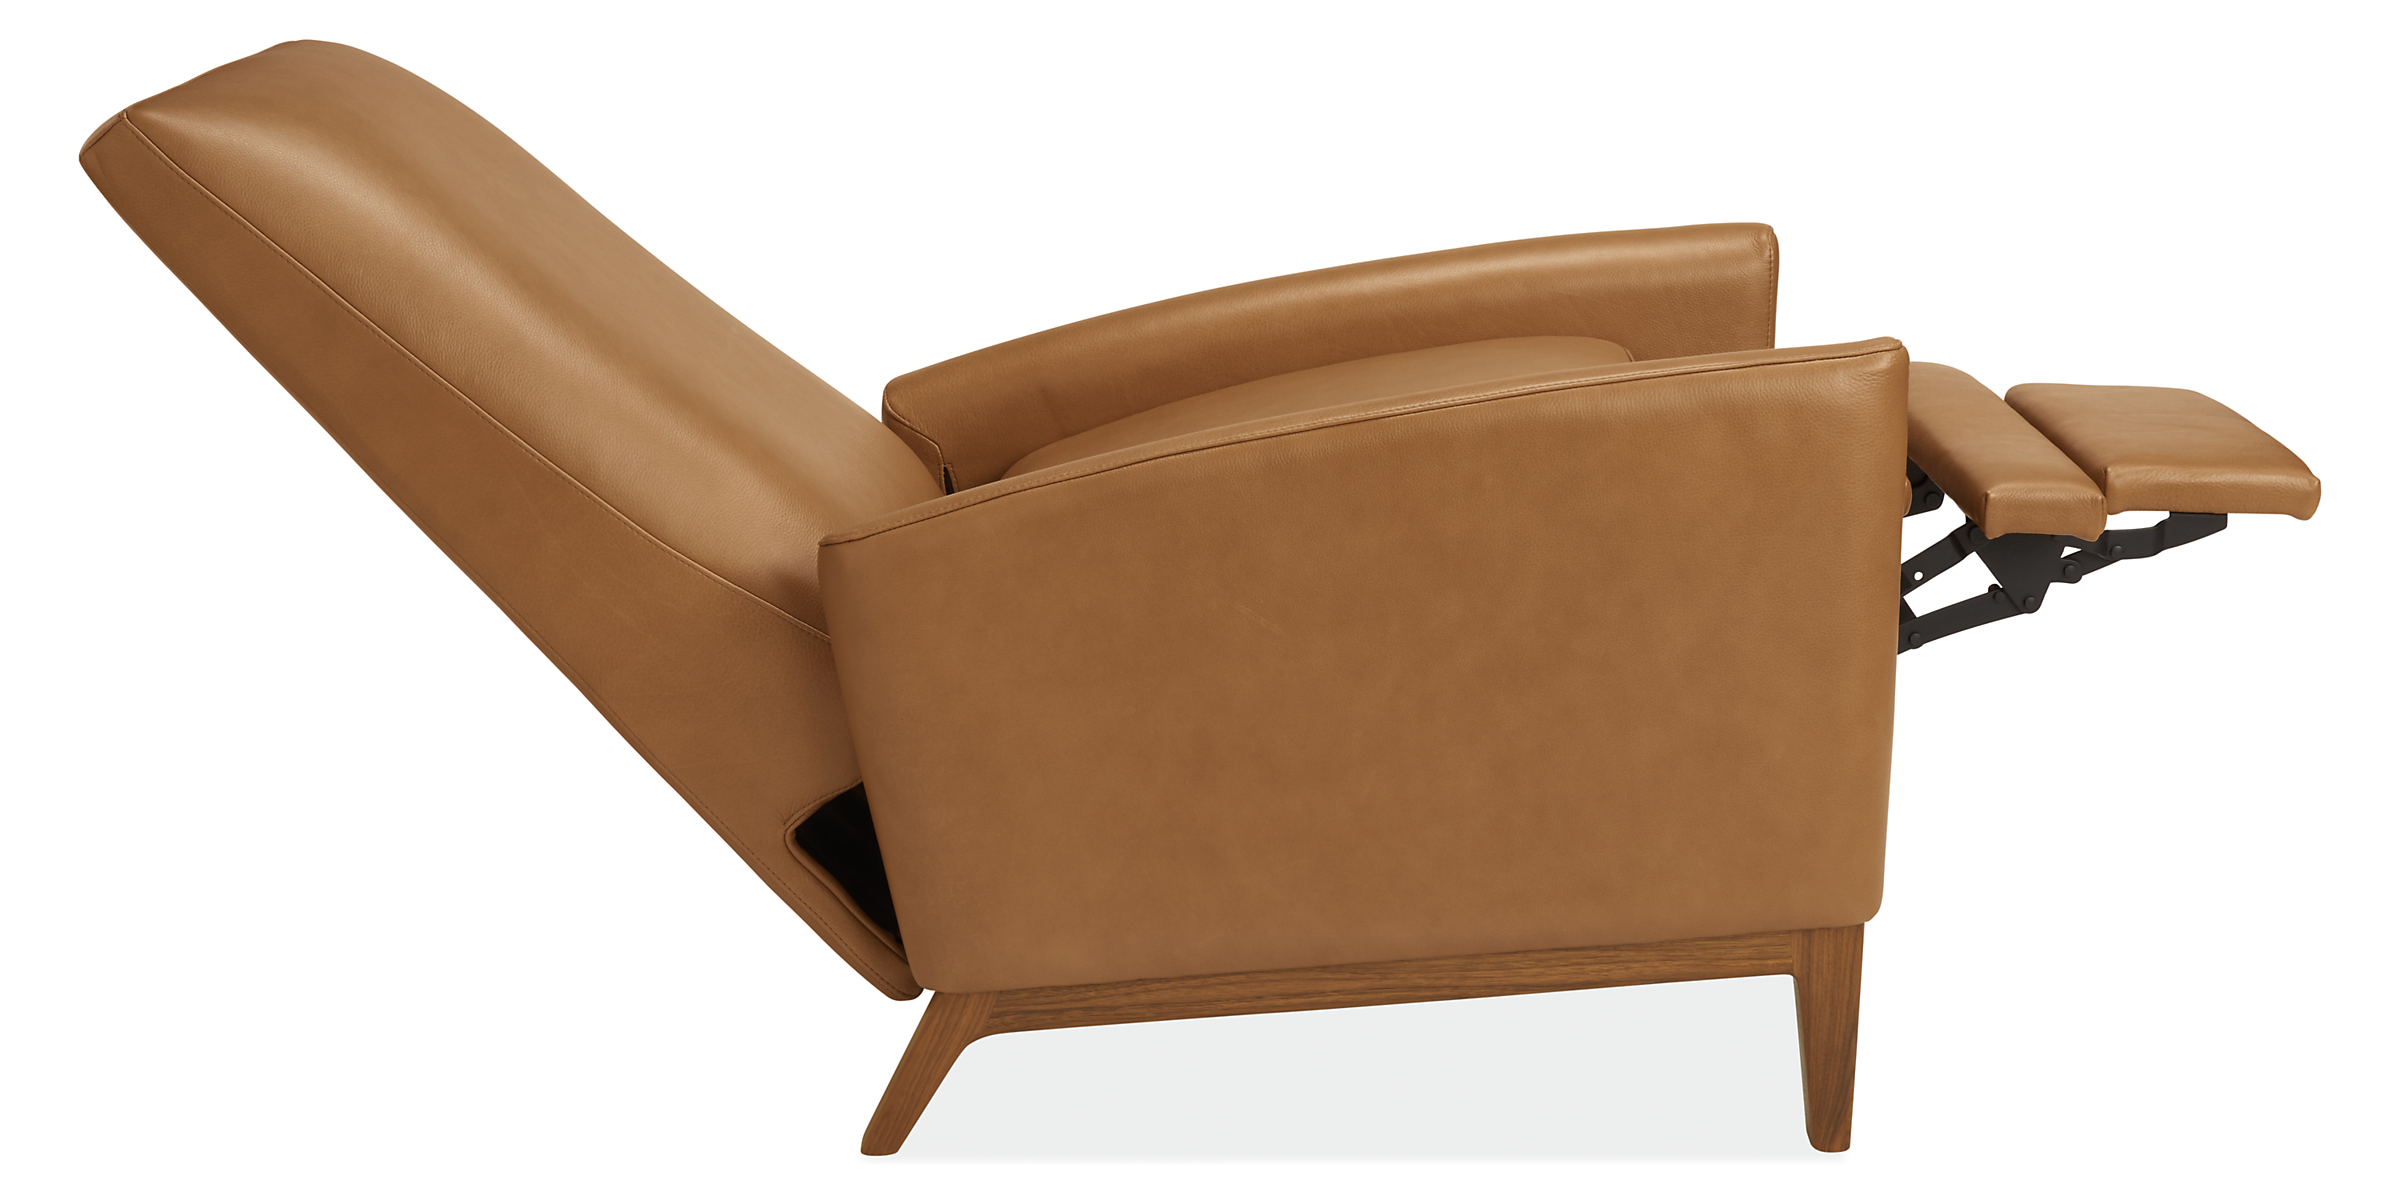 Open side view of Arlo curved-arm recliner in leather.